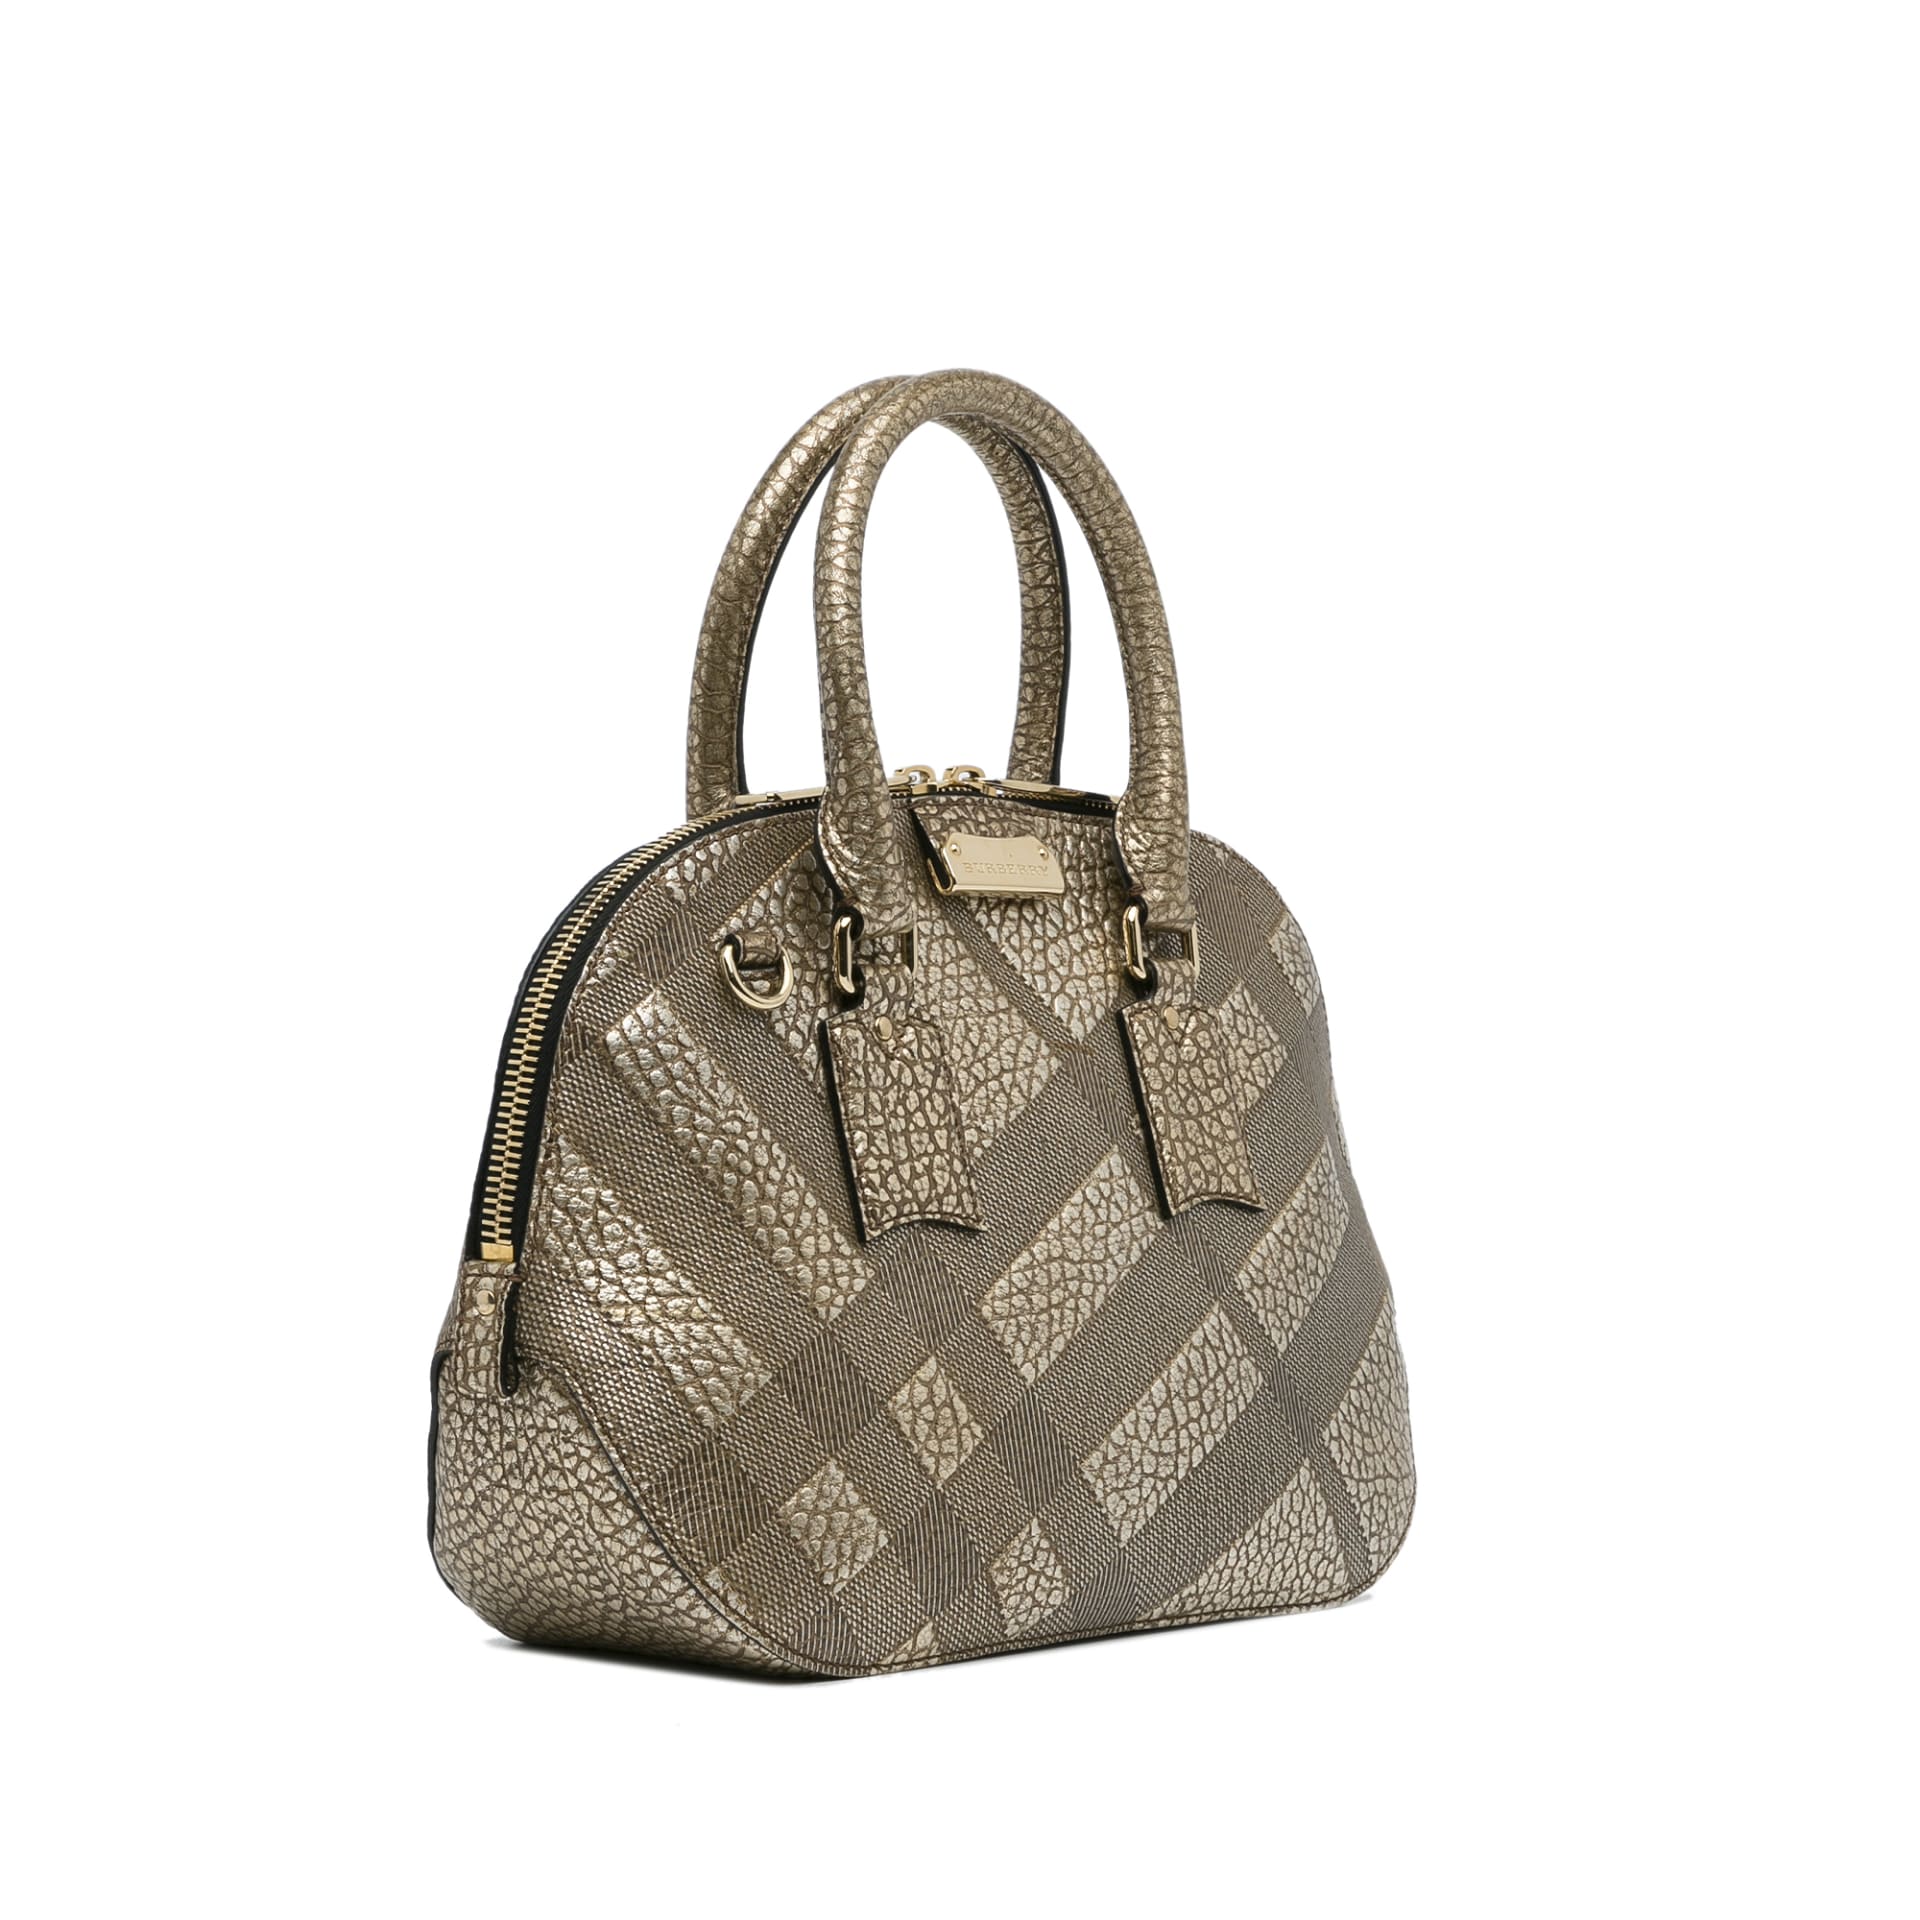 Burberry Embossed Leather Orchard Handle Bag